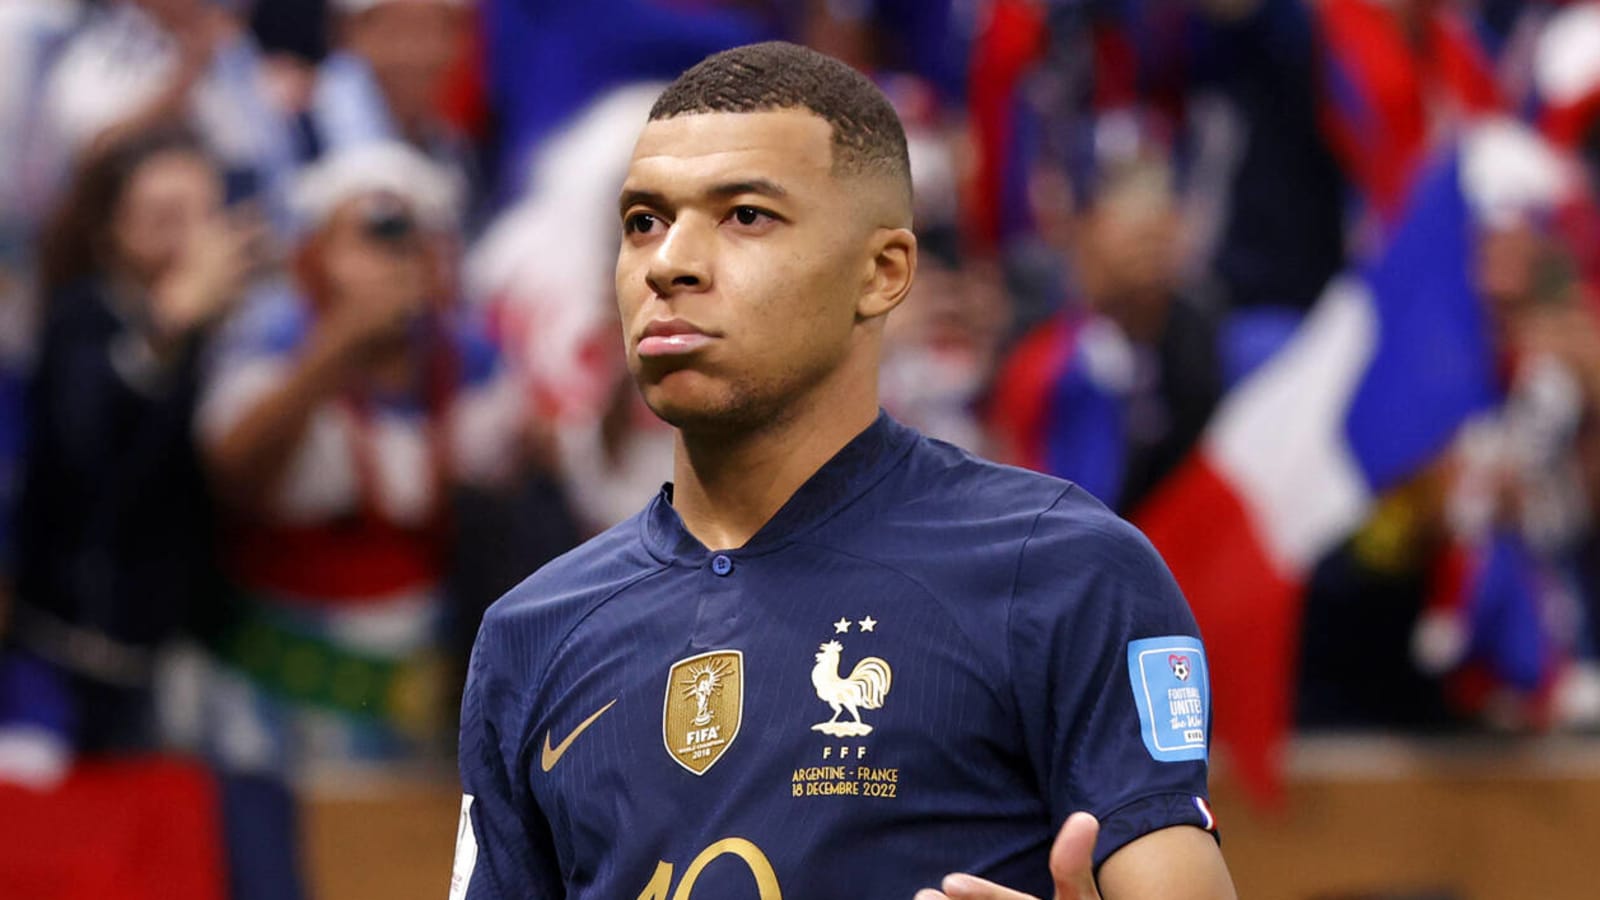 New update on Real Madrid pursuit of Kylian Mbappe emerges